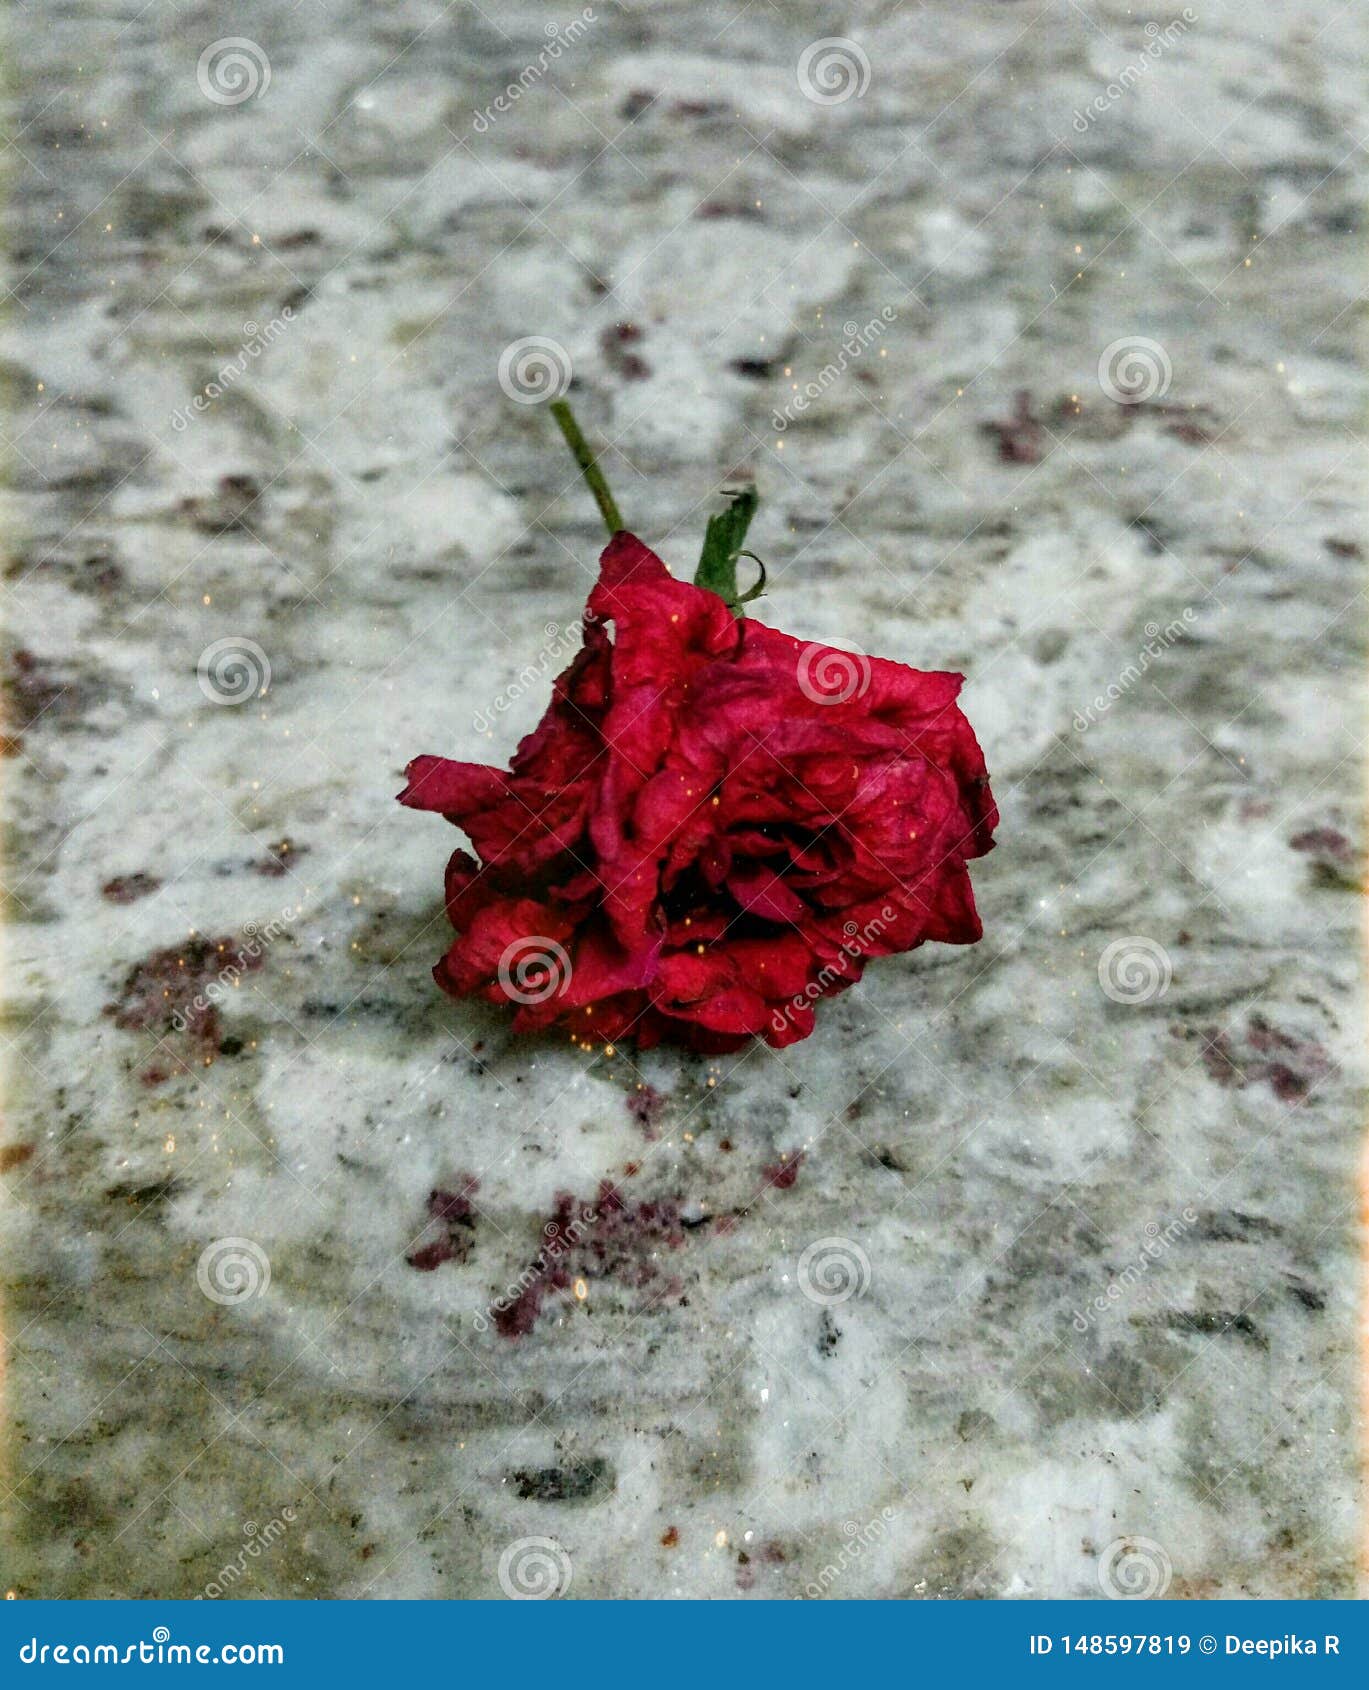 An Aesthetic Presentation Of A Beautiful Faded Red Rose With